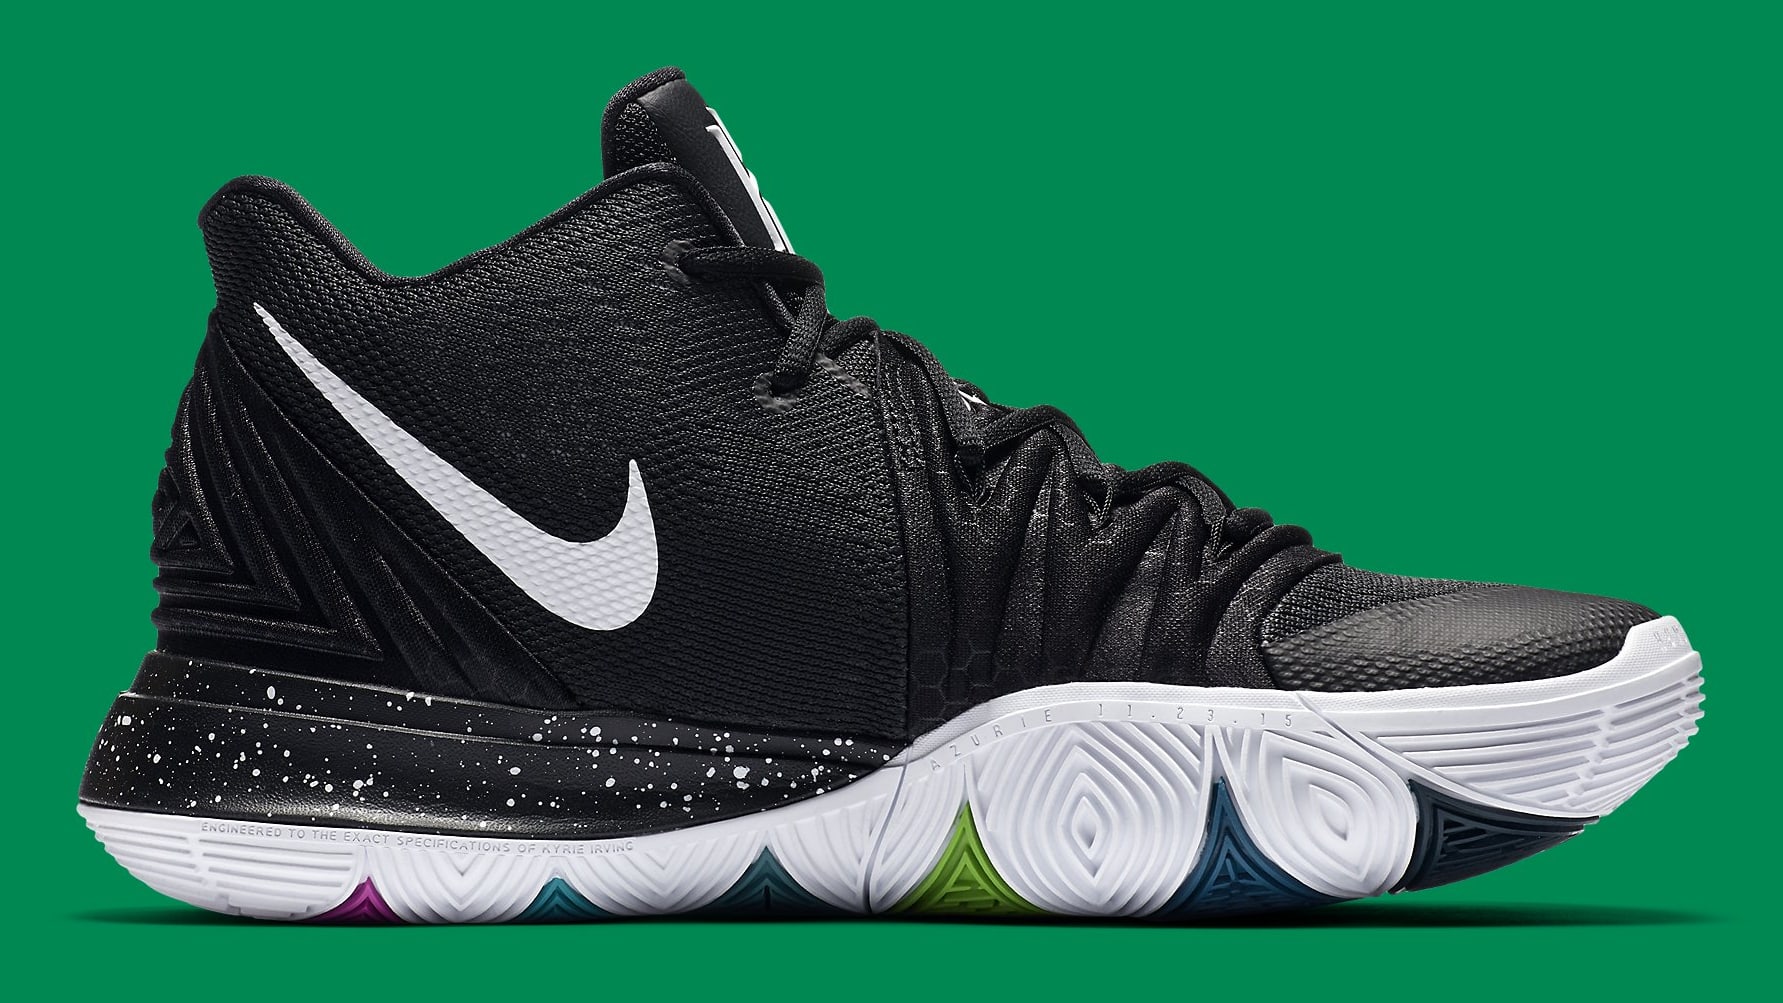 Kyrie 5 EP Men 's Shoes Philippines Black White Bright